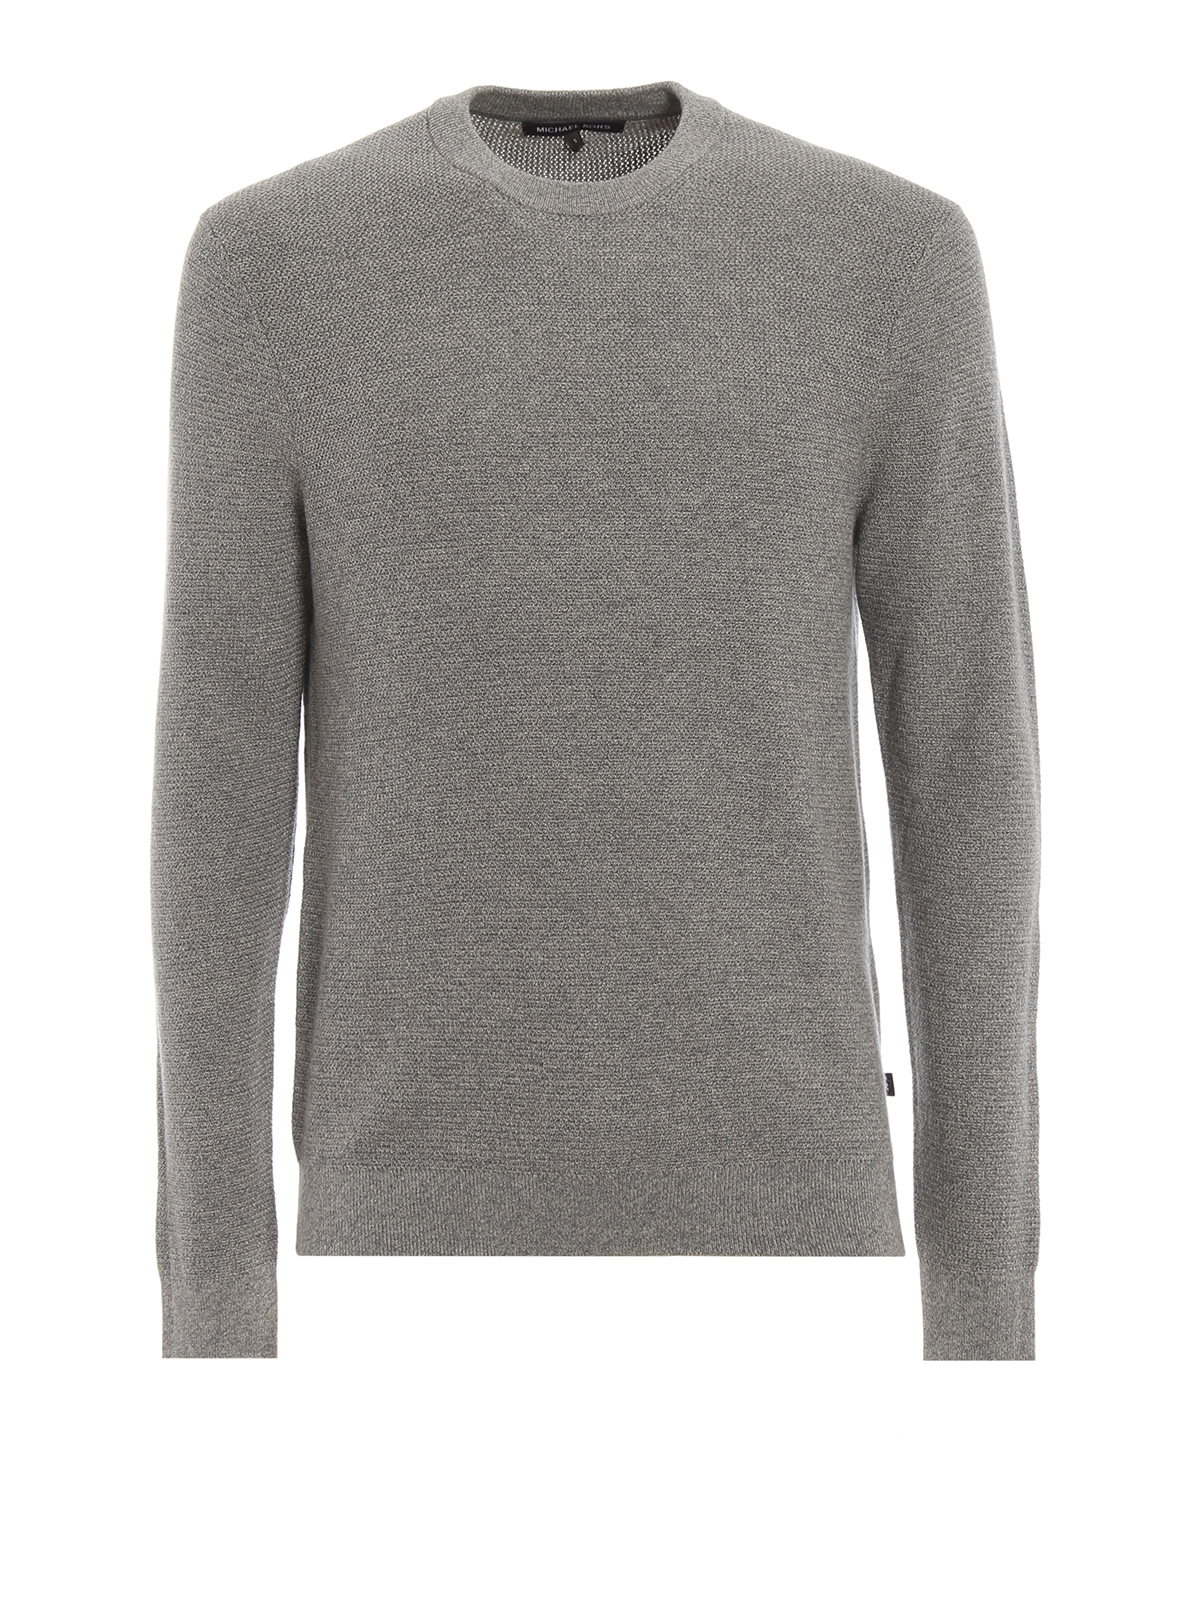 Michael Kors Light Grey Soft Cotton And Wool Sweater In Gray